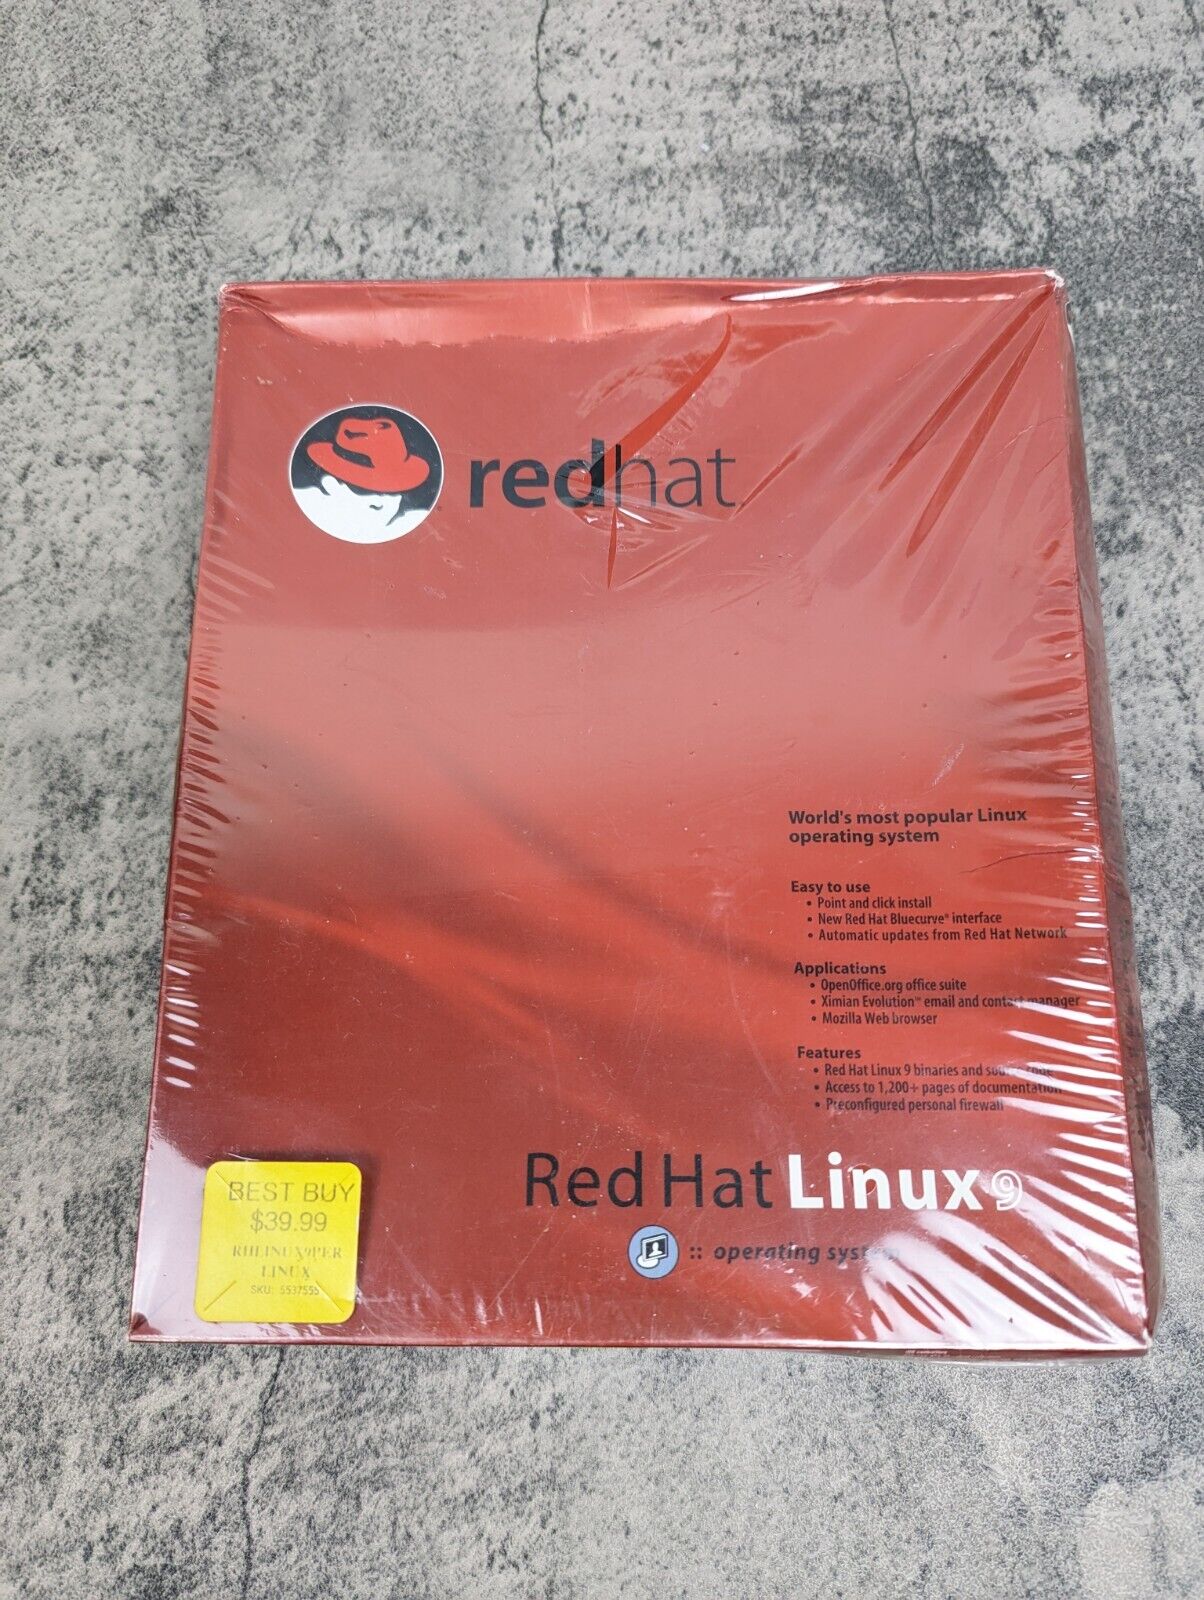 NEW Red Hat Linux 9 Operating System Software 2003 SEALED